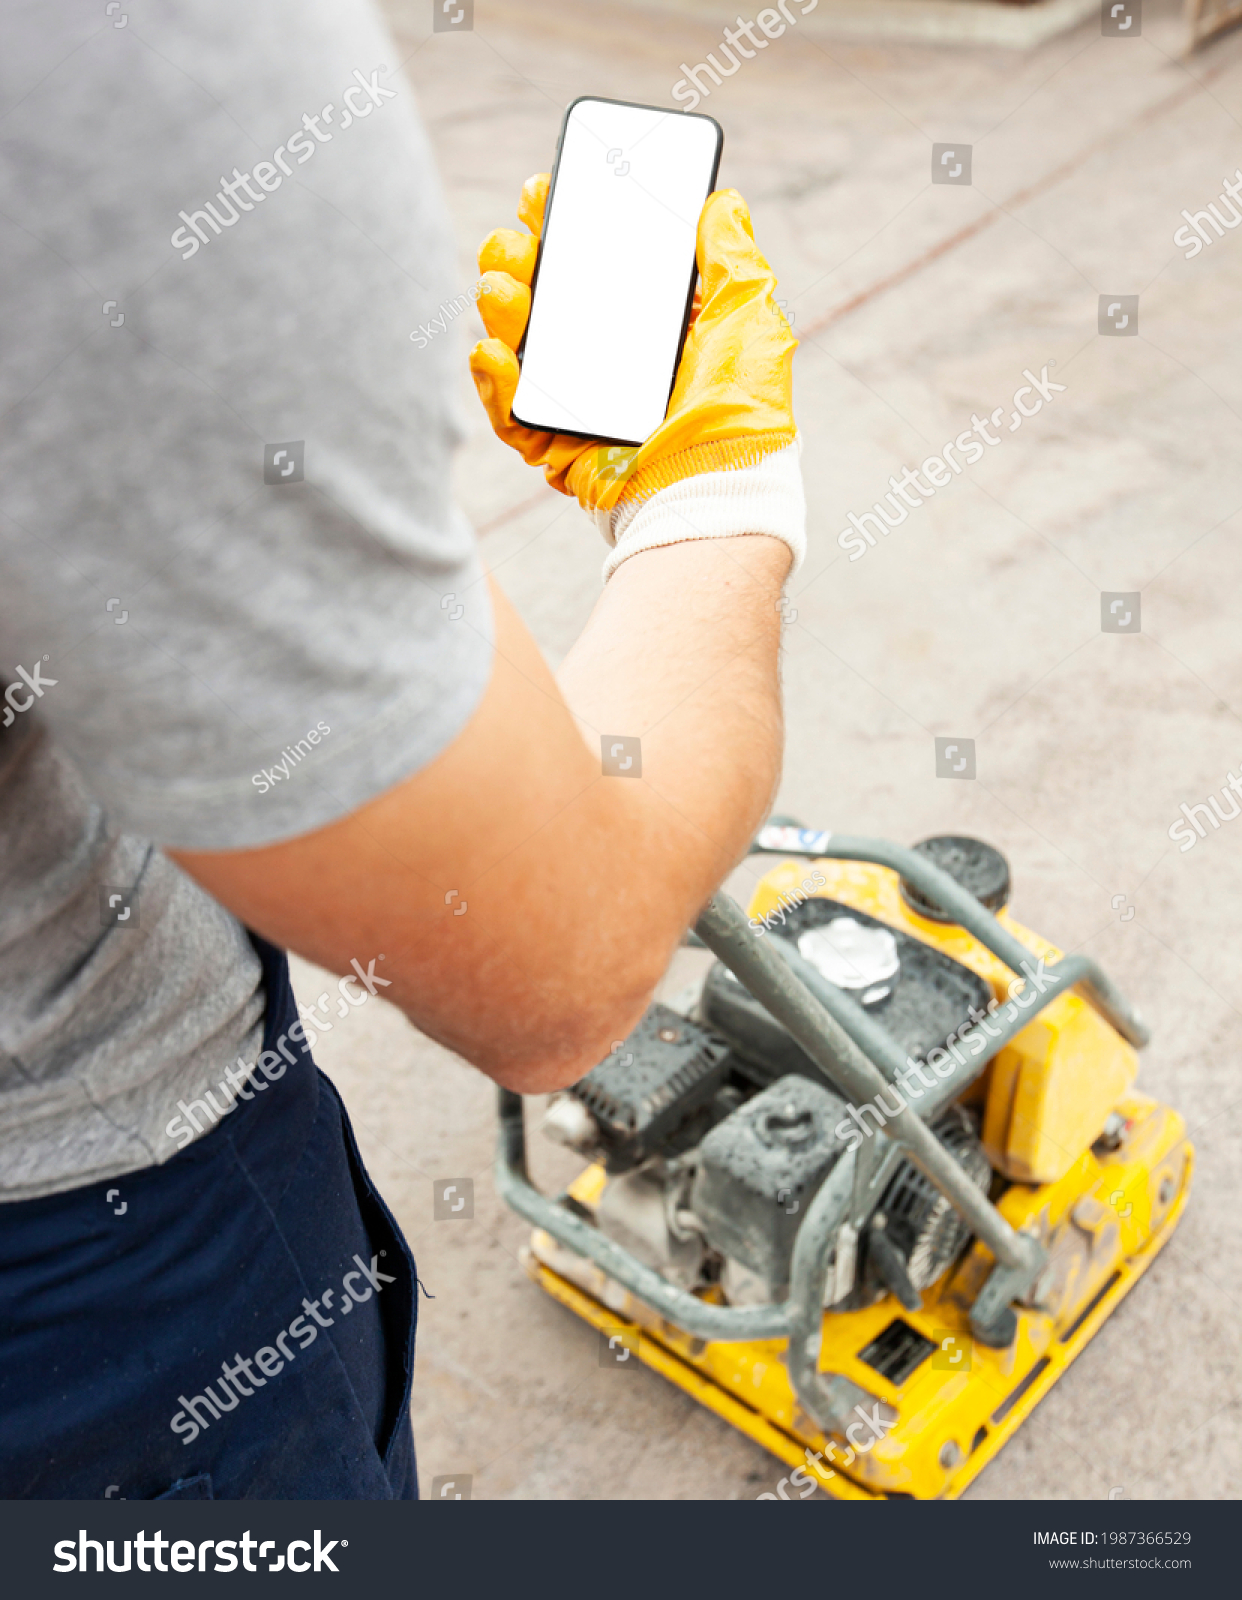 The worker holds the phone while tamping a gravel by the vibration plate. Mockup for house repair or building #1987366529